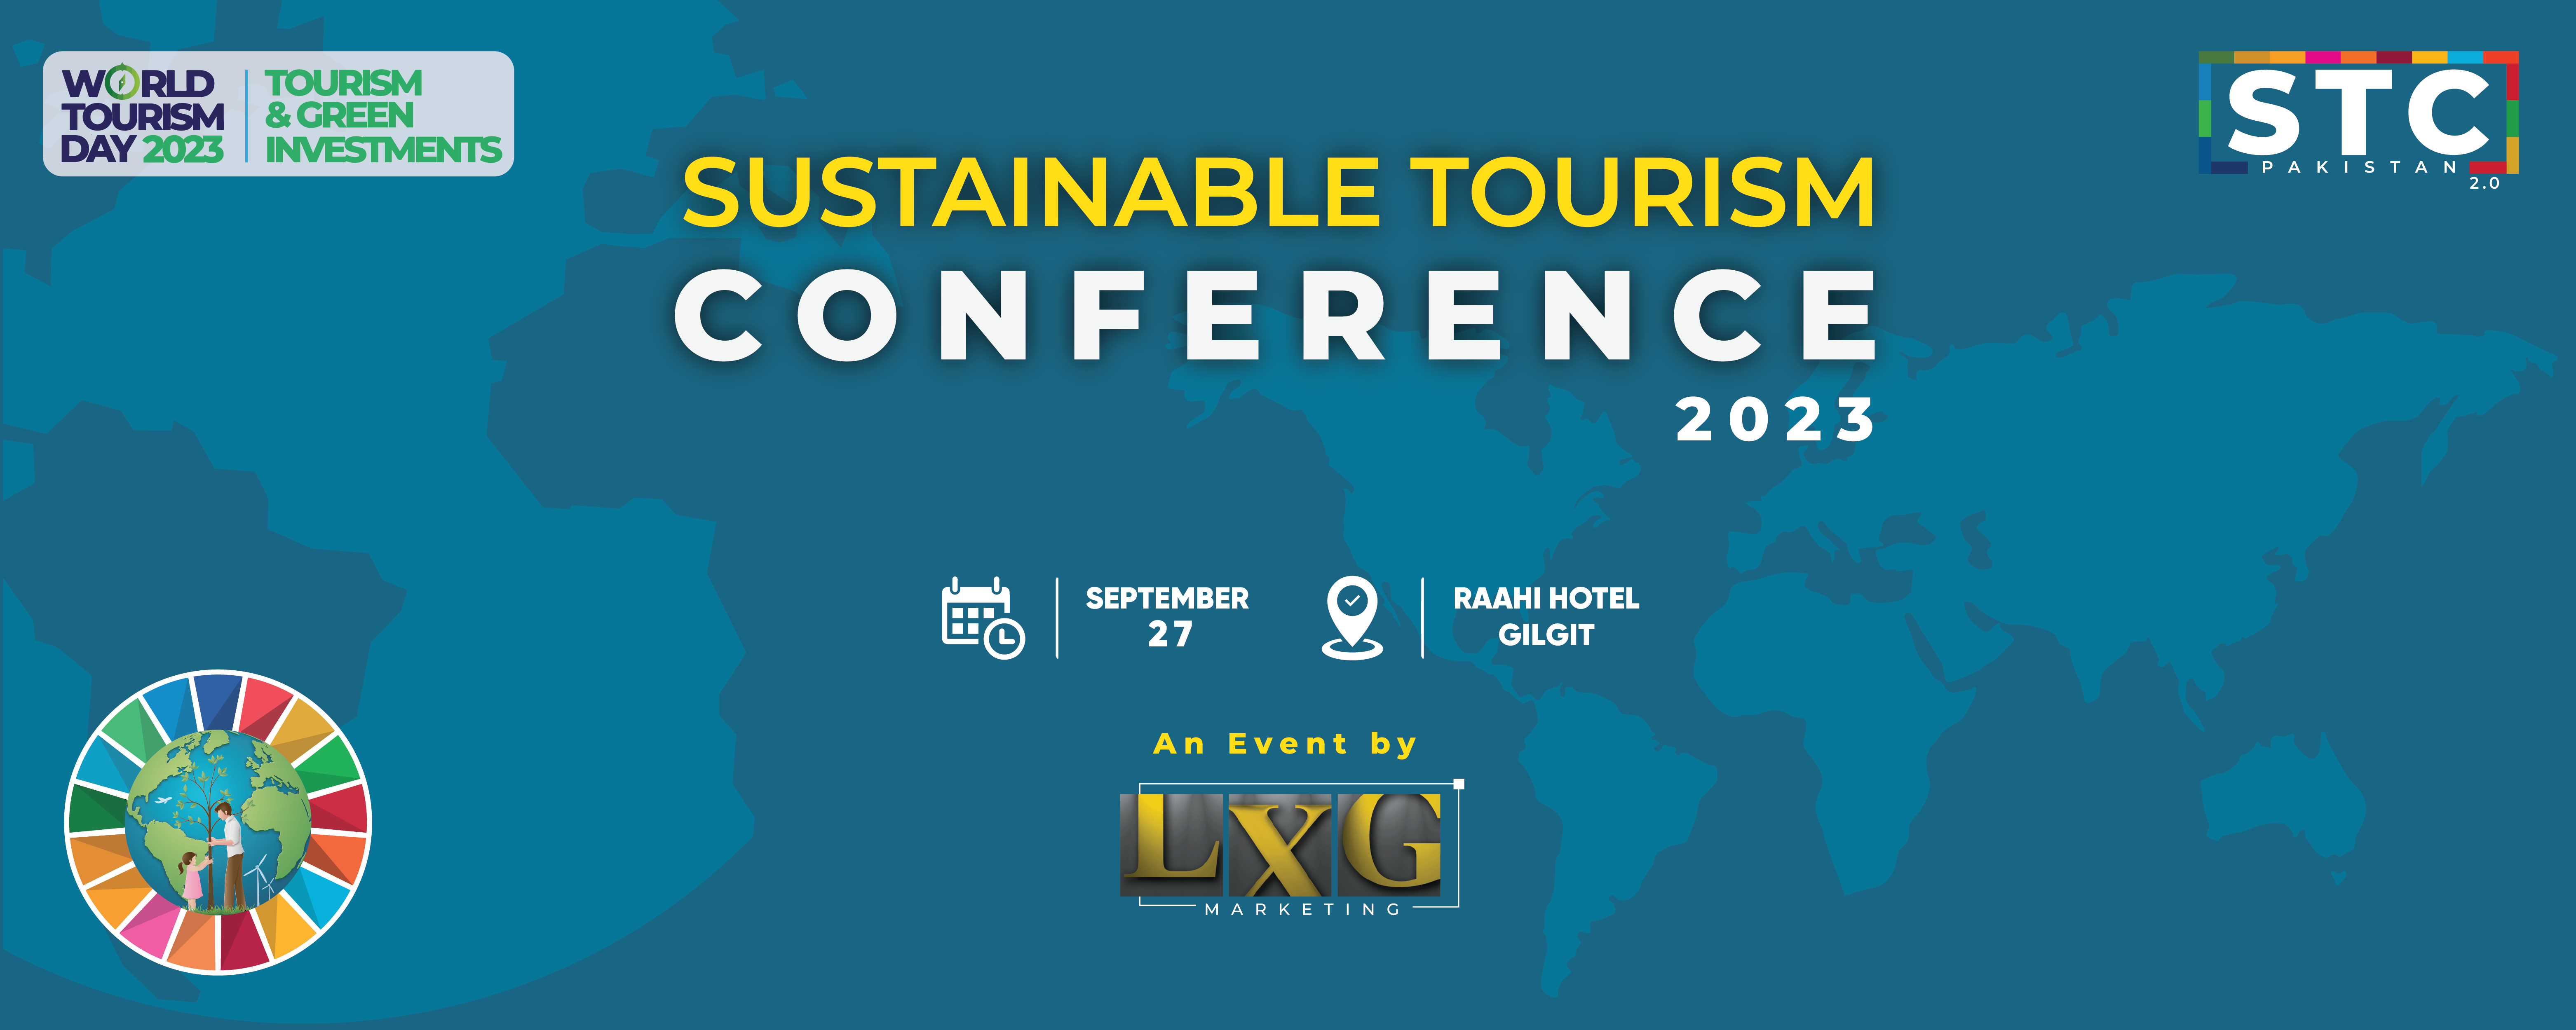 Sustainable Tourism Conference 2.0